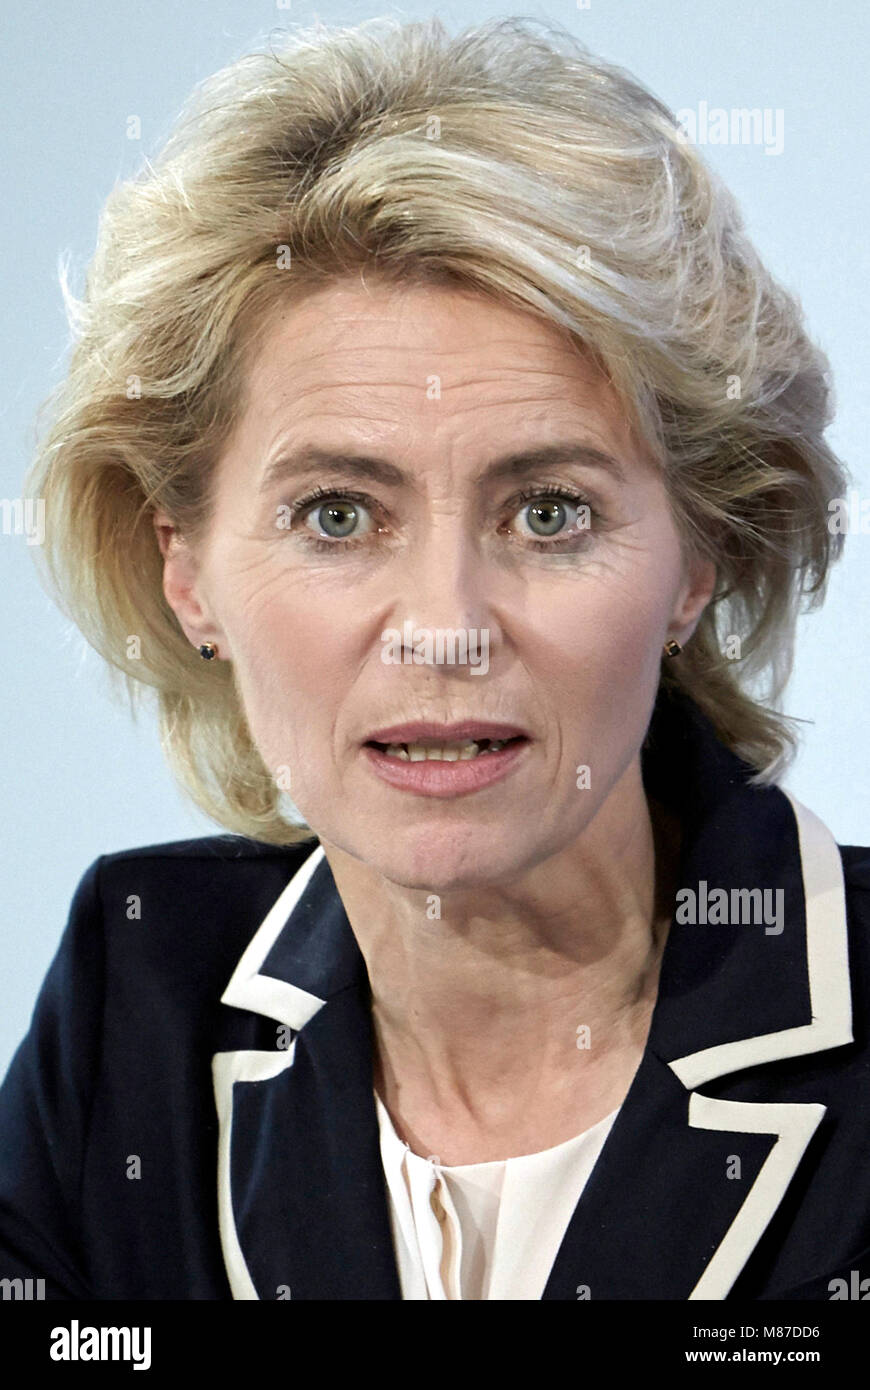 Ursula von der Leyen - 08.10.1958: German politician of the CDU and the Federal Minister of Defence since December 2013. Stock Photo